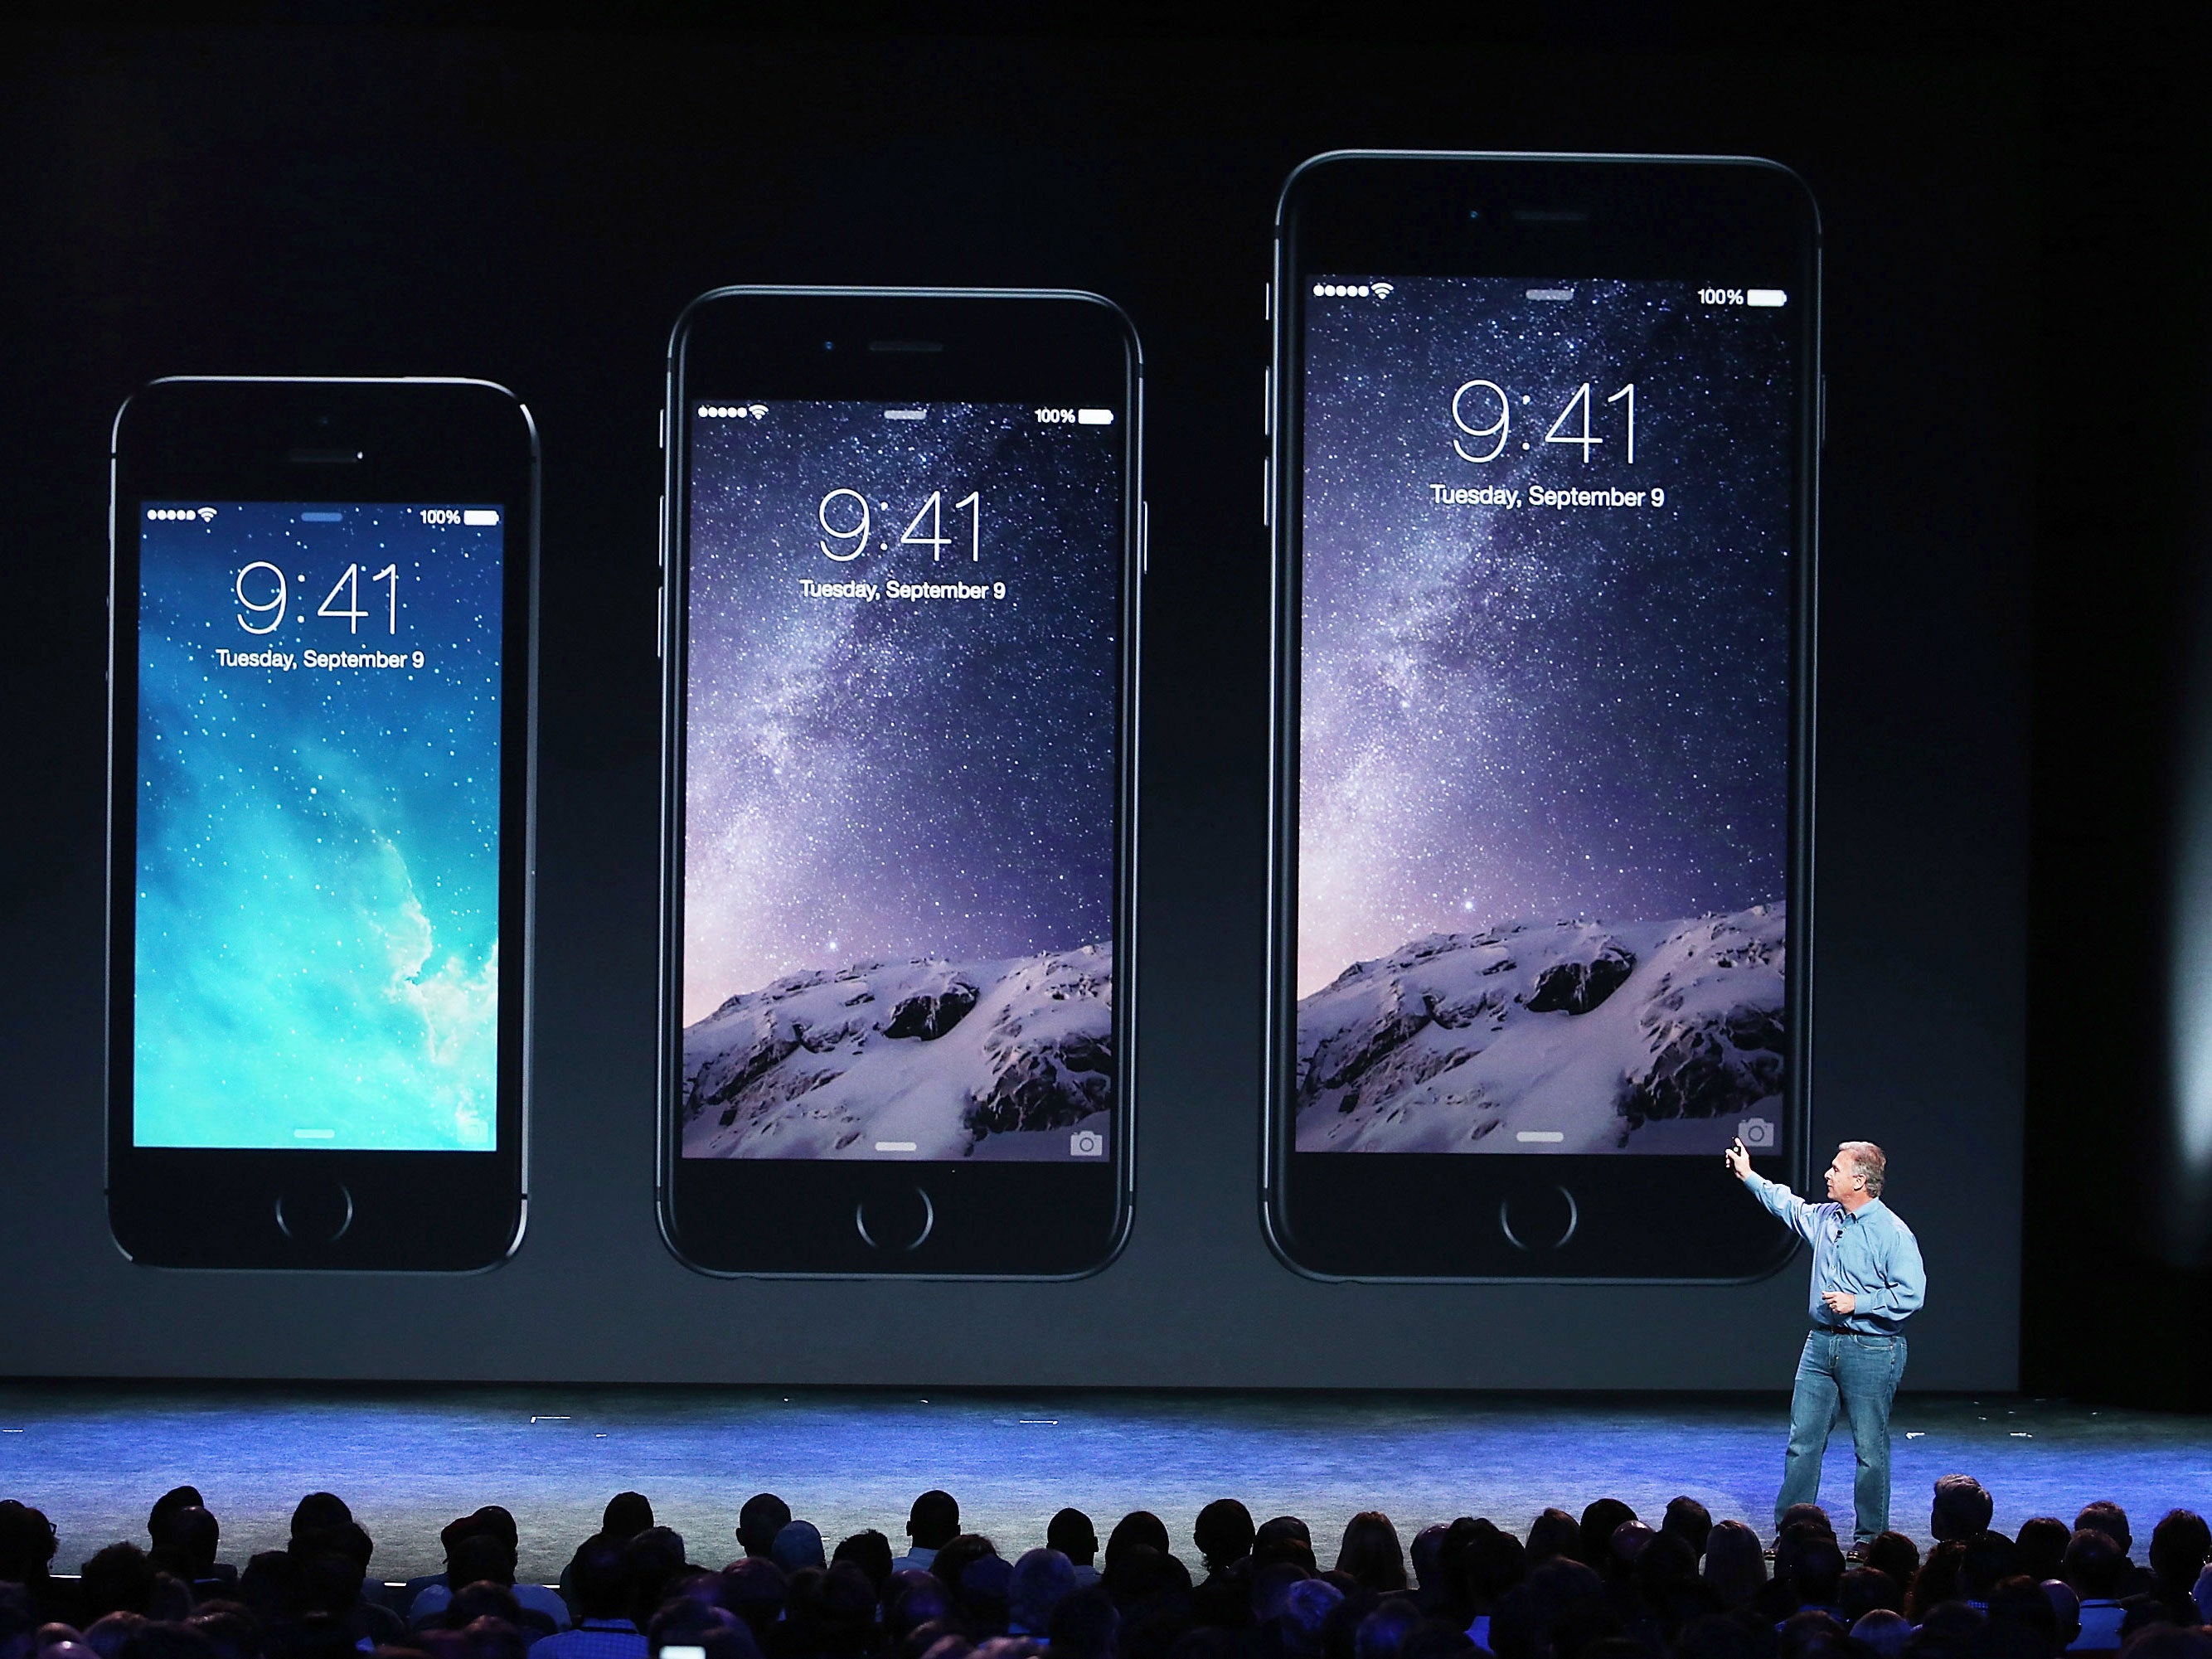 Apple Senior Vice President of Worldwide Marketing Phil Schiller announces the new iPhone 6 during an Apple special event at the Flint Center for the Performing Arts on September 9, 2014 in Cupertino, California